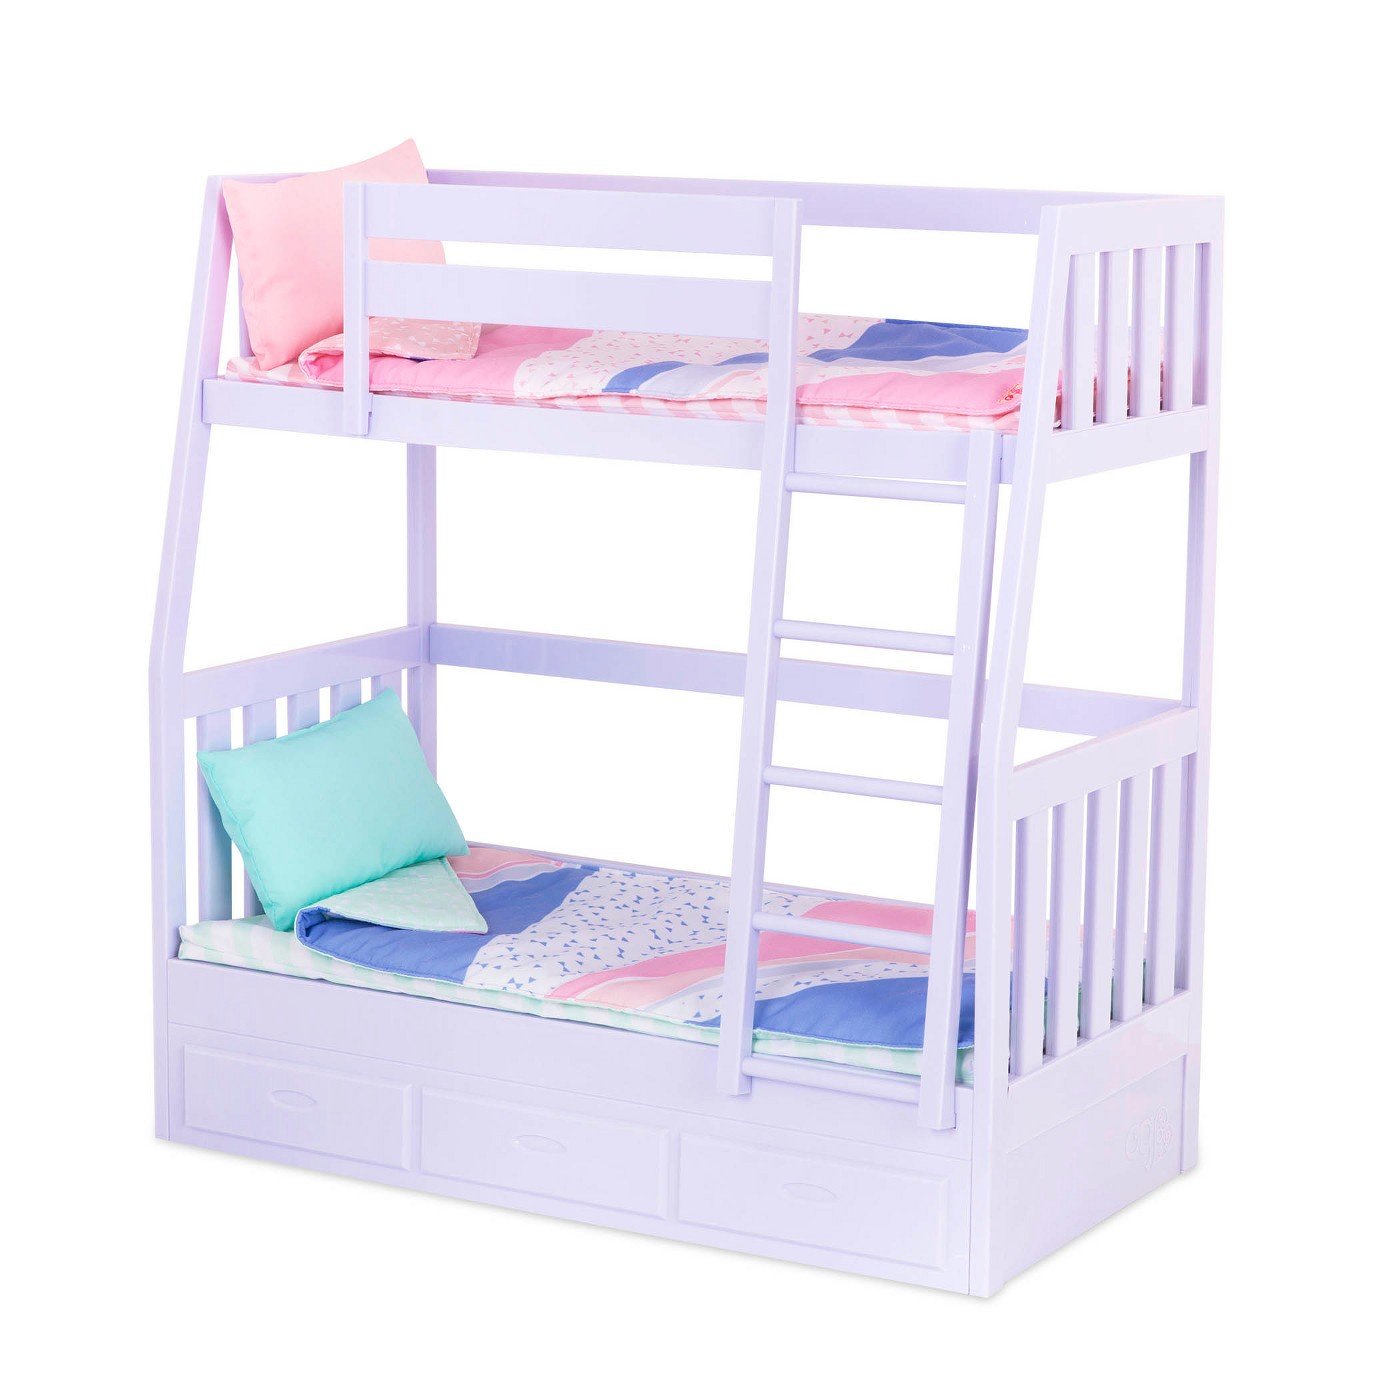 dream bunk beds our generation